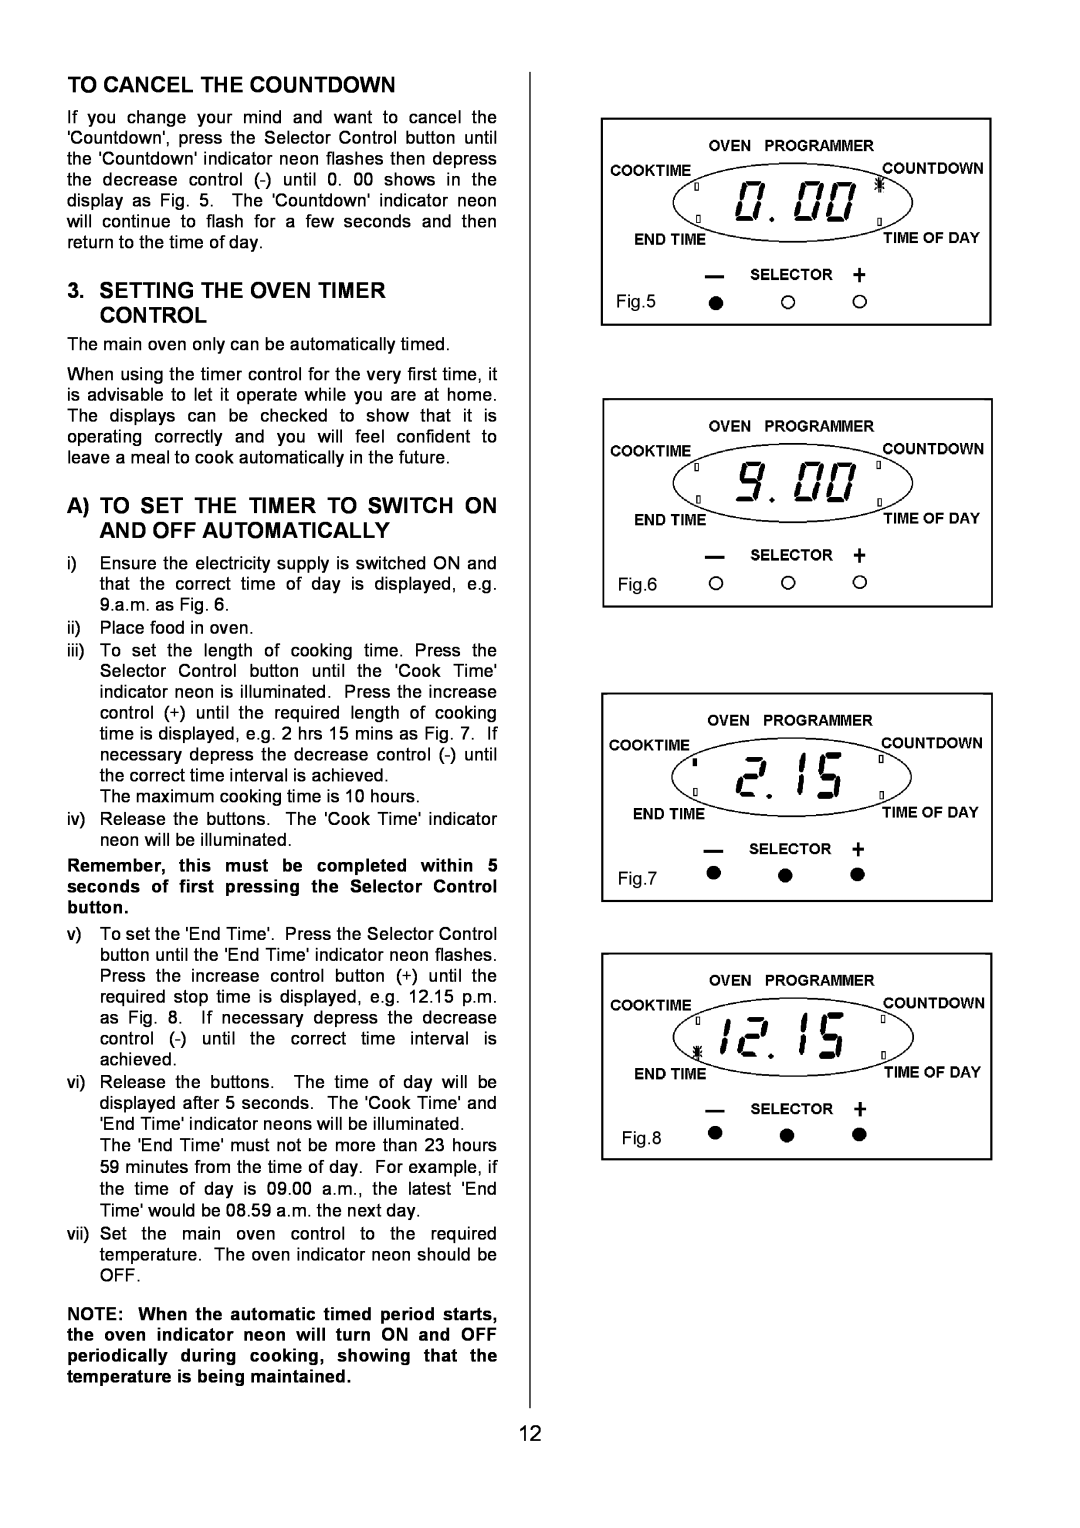 Tricity Bendix SIE454 installation instructions To Cancel The Countdown, Setting The Oven Timer Control 